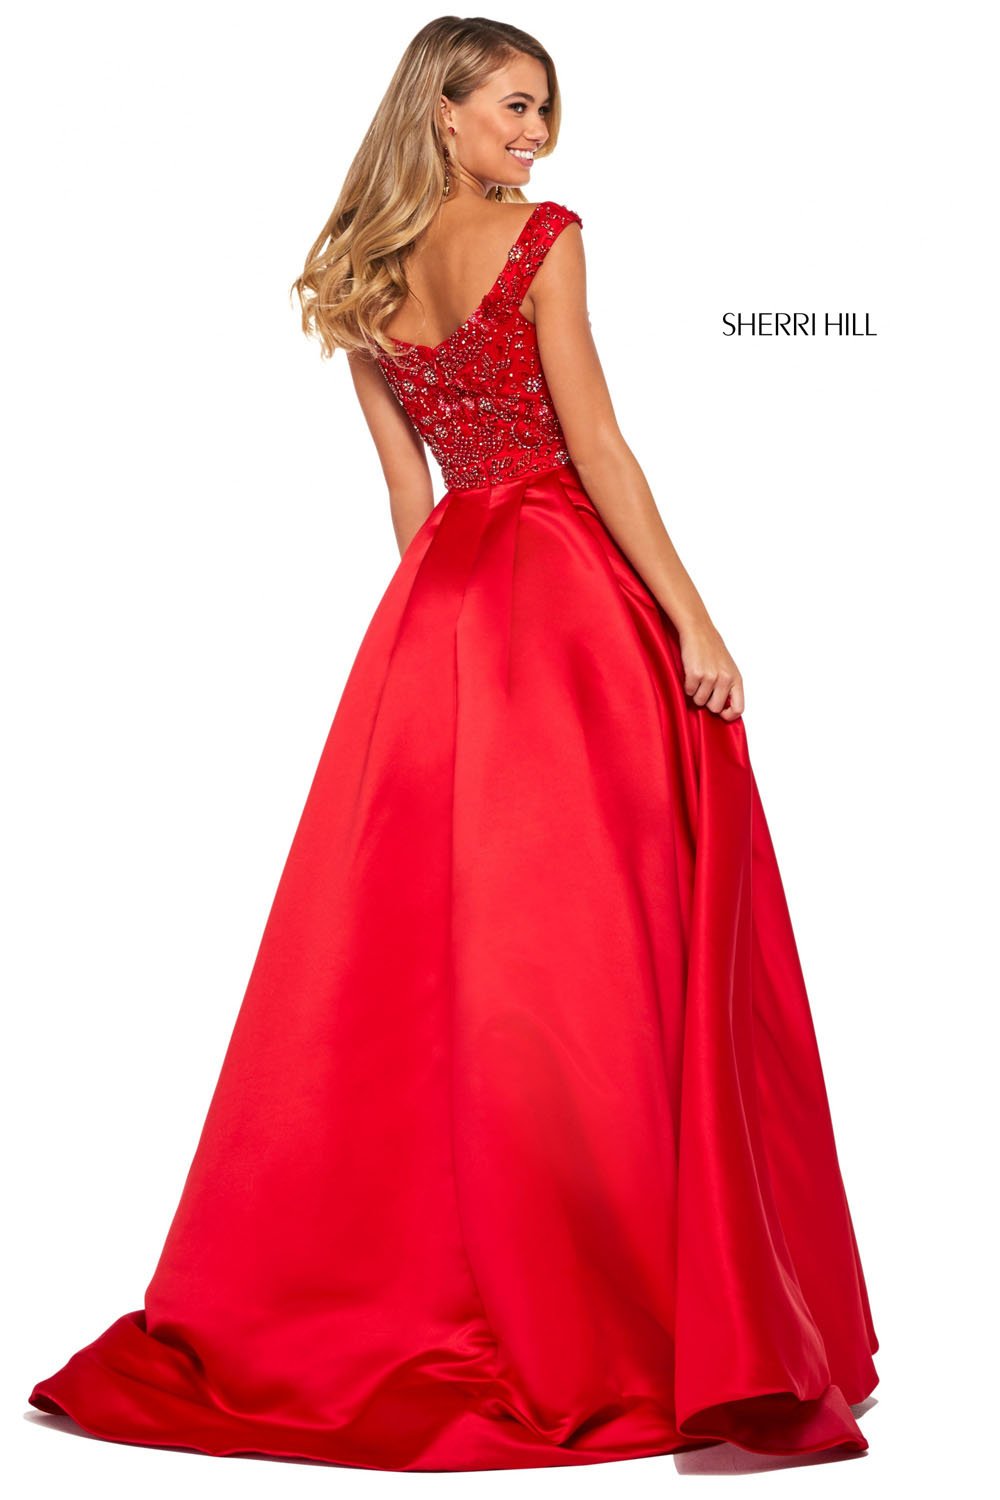 Sherri Hill 53317 dress images in these colors: Royal, Teal, Red, Emerald, Black, Ivory, Candy Pink, Aqua.